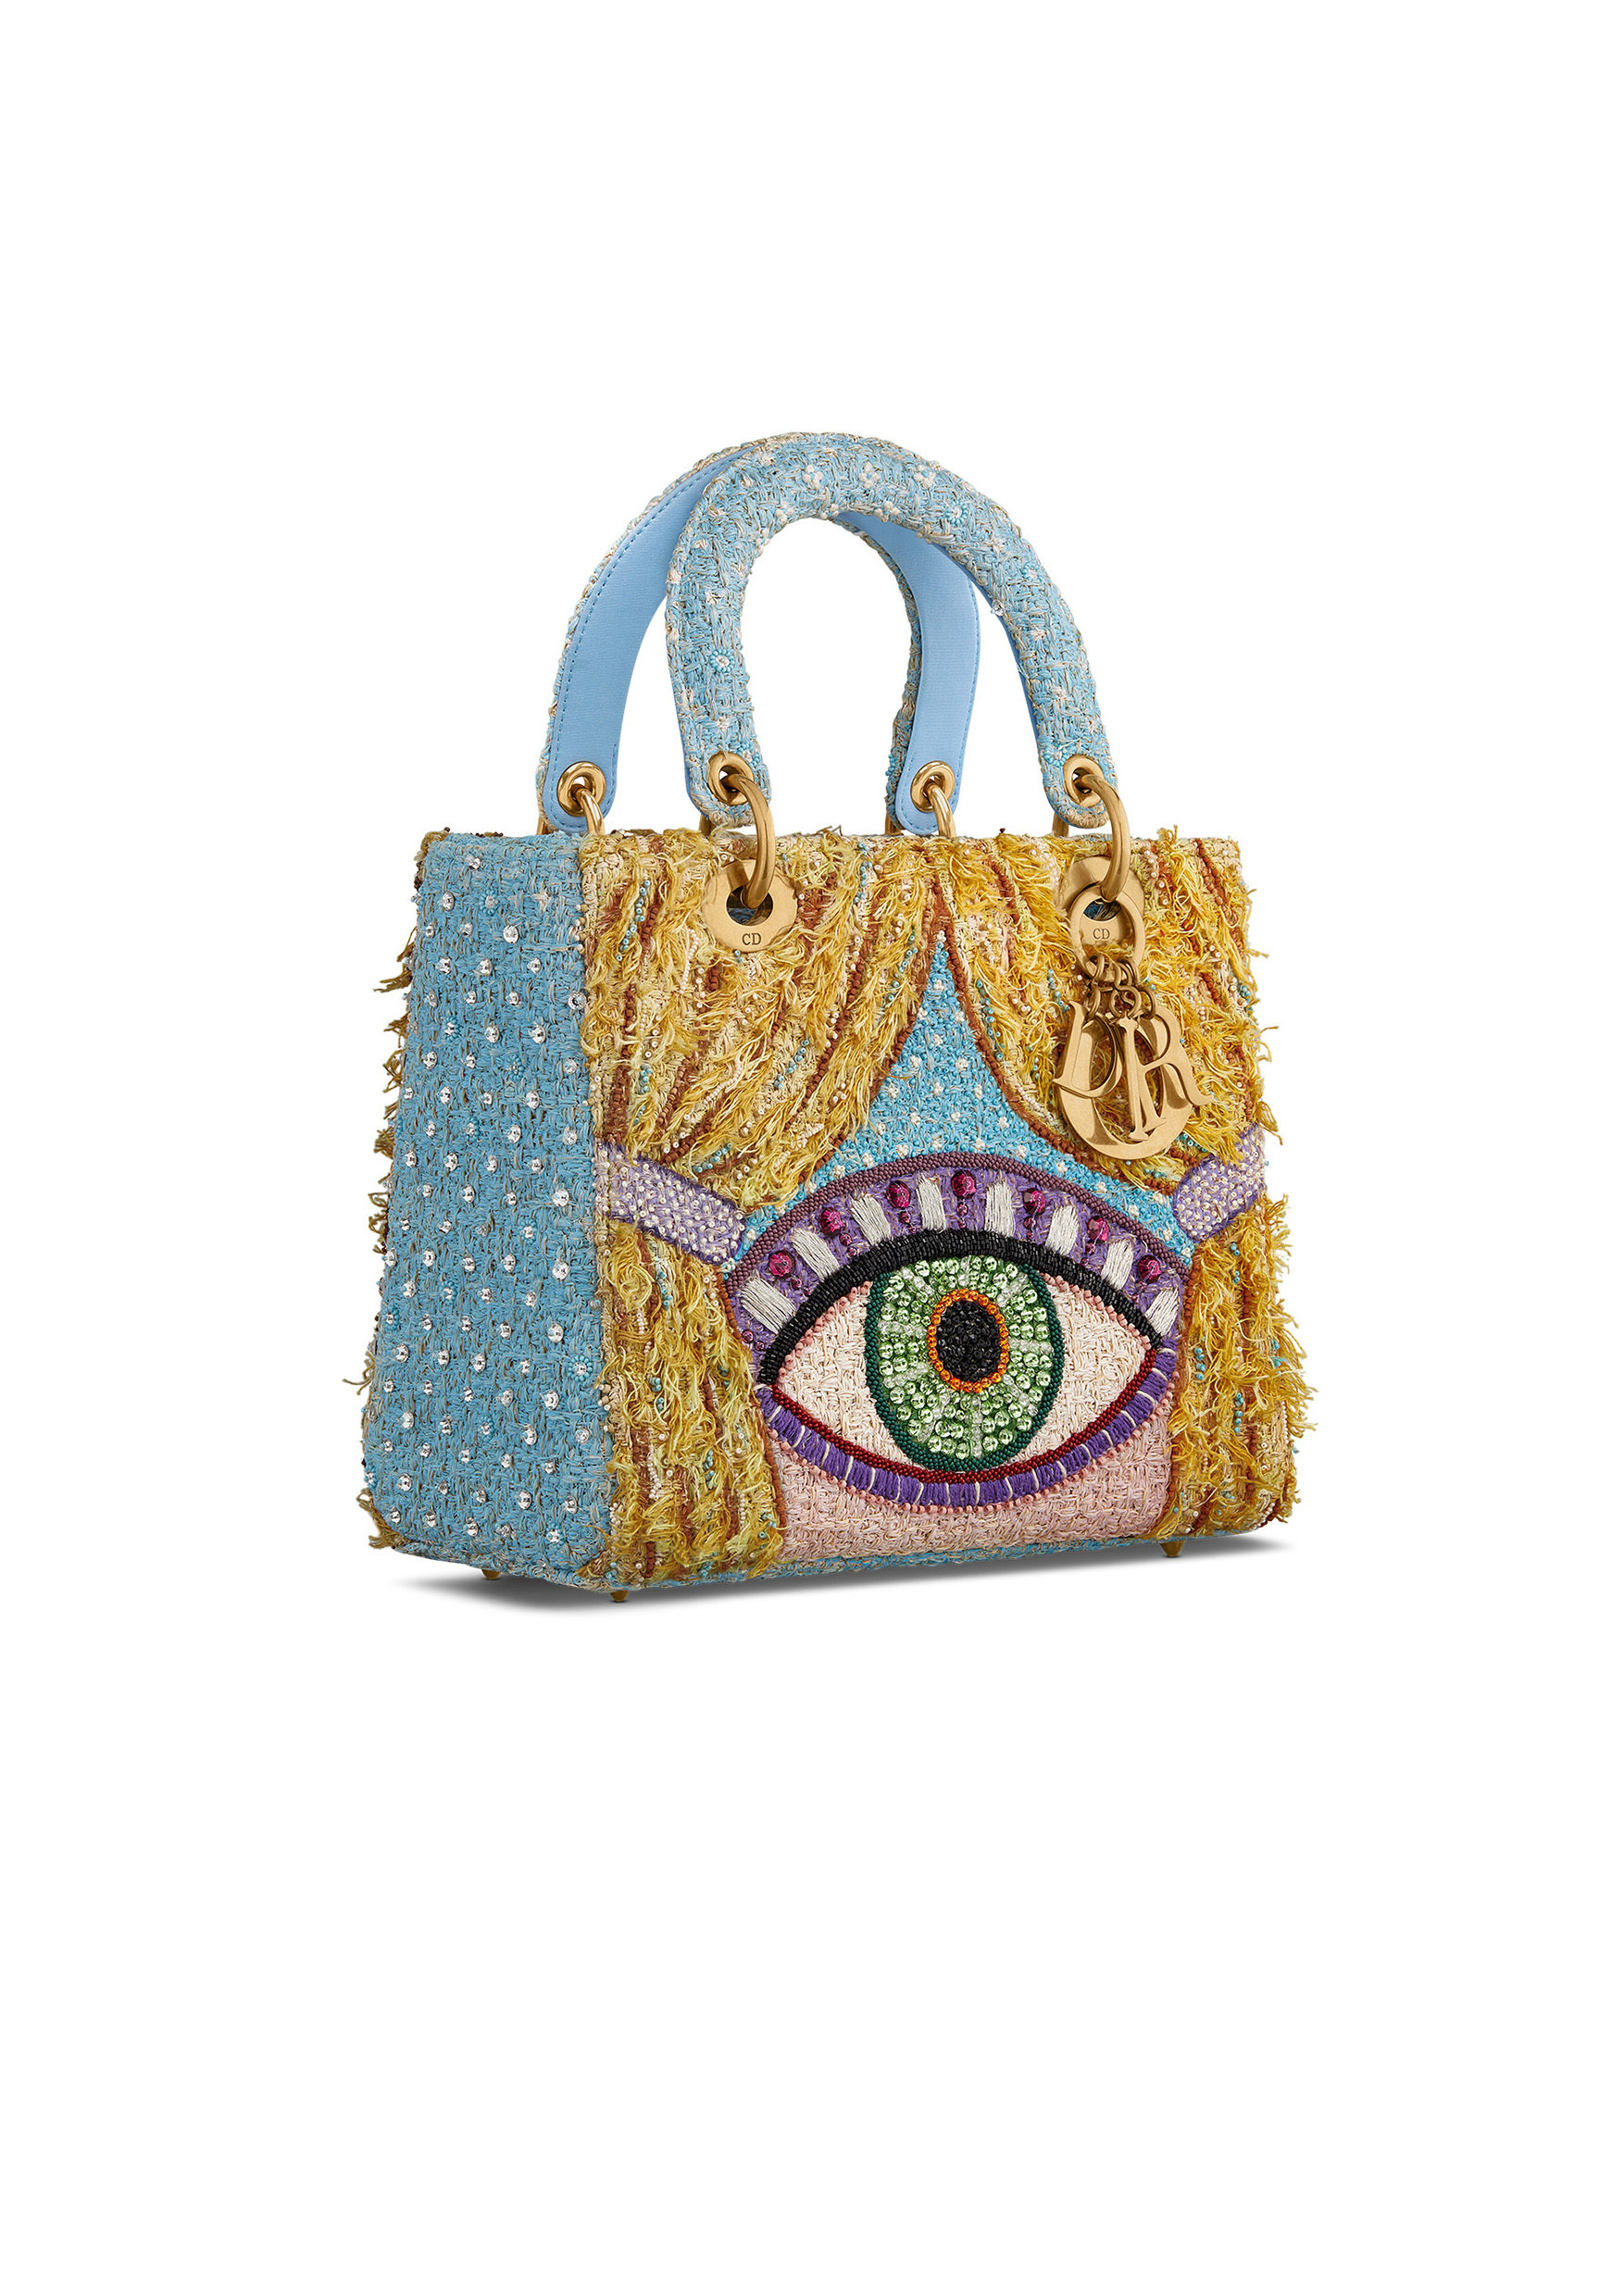 7 Lady Dior Bag - Dior Lady Art limited edition in collaboration with Brian Calvin.jpg